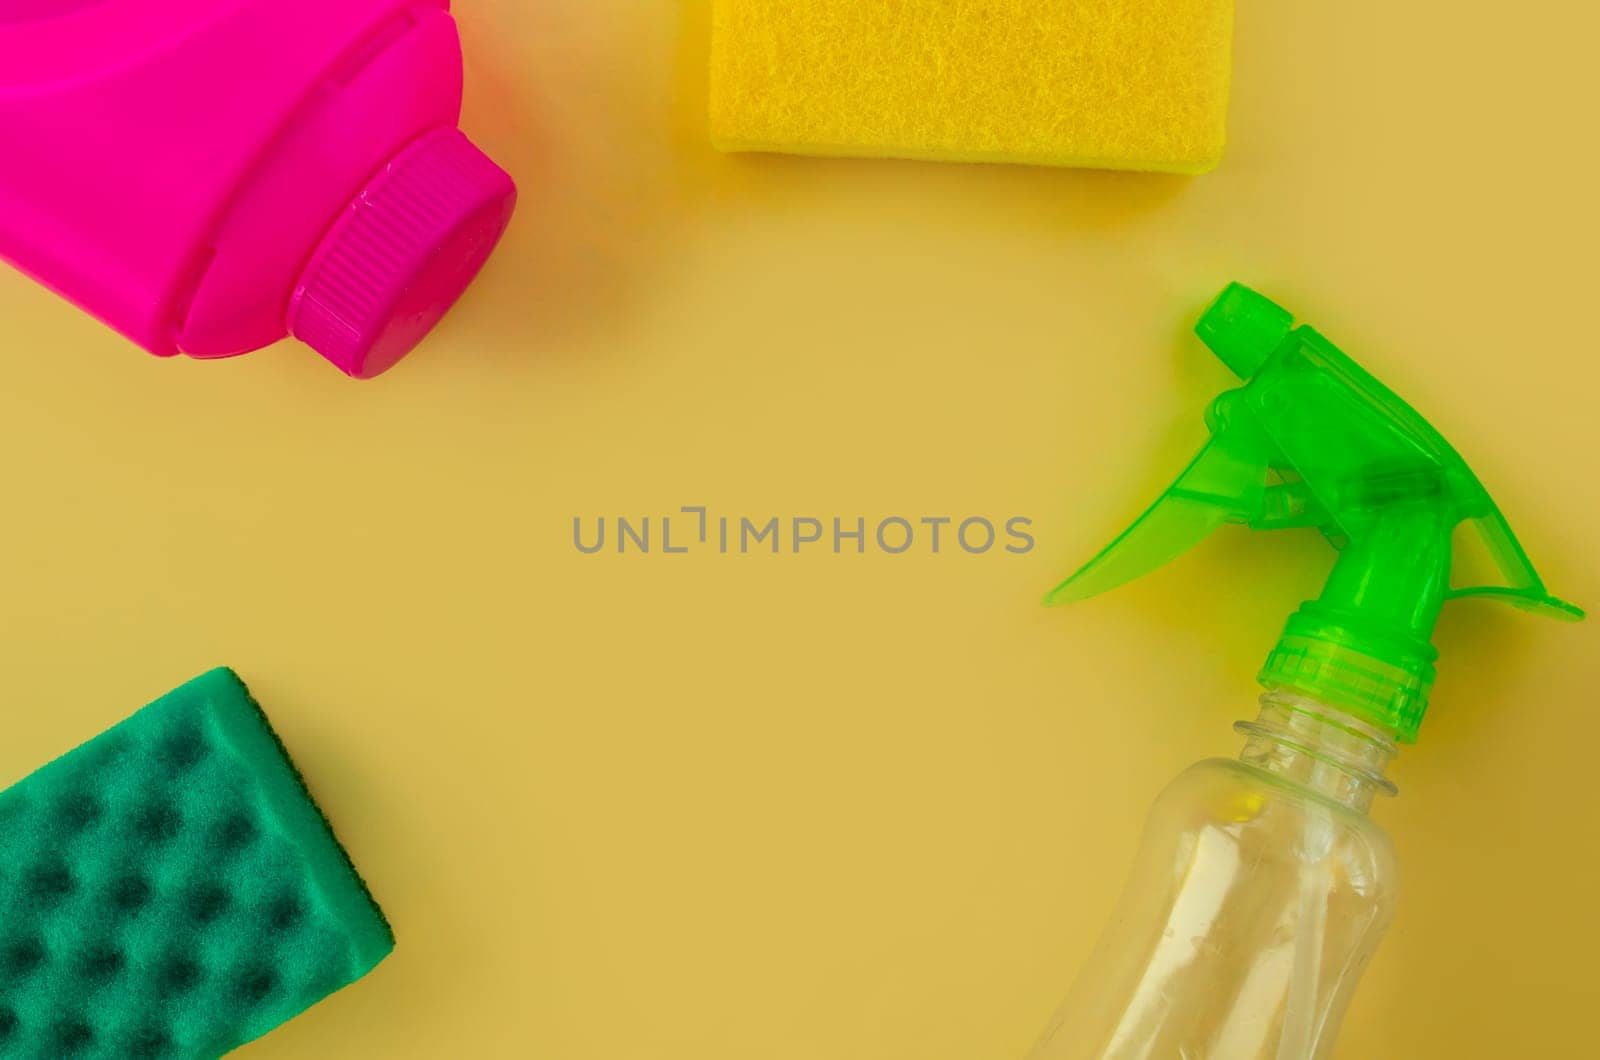 Cleaning. Flat lay Bottles with cleaning product and sponges on a yellow background. Cleaning supplies, top view.